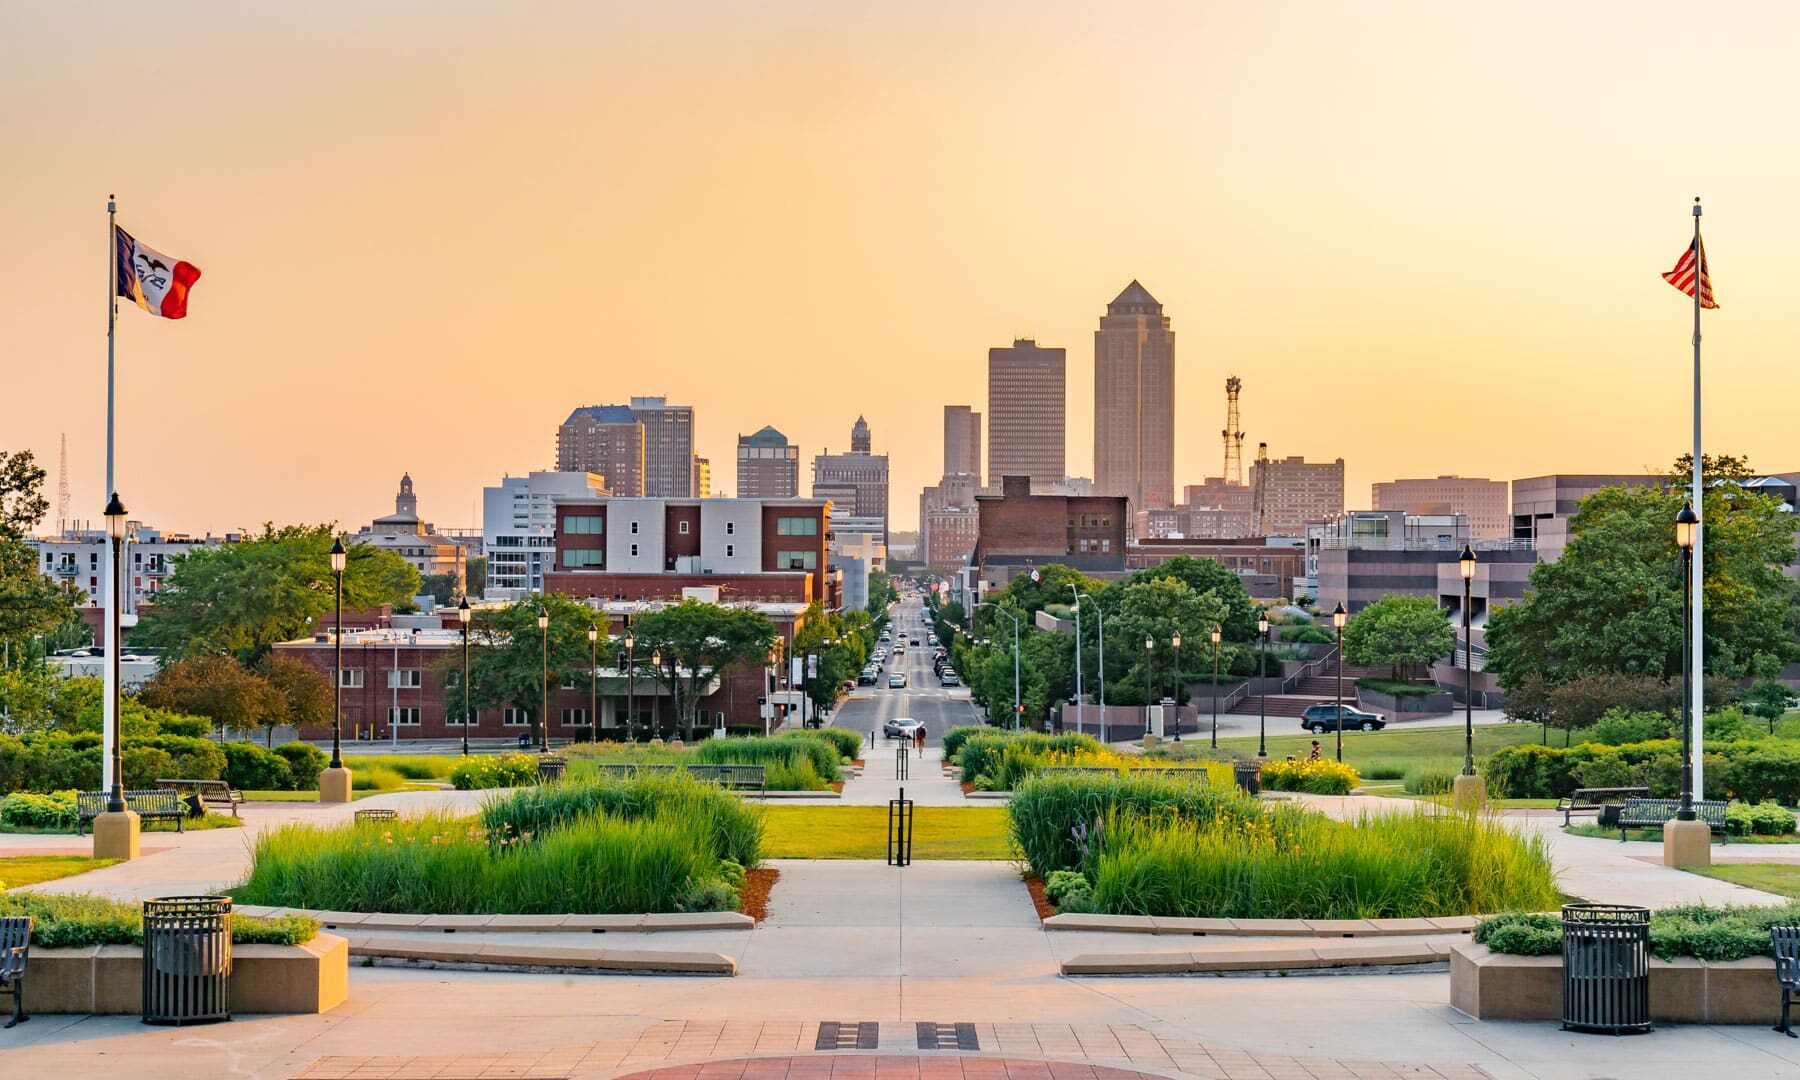 15 Best Things to Do in West Des Moines (Iowa) - The Crazy Tourist